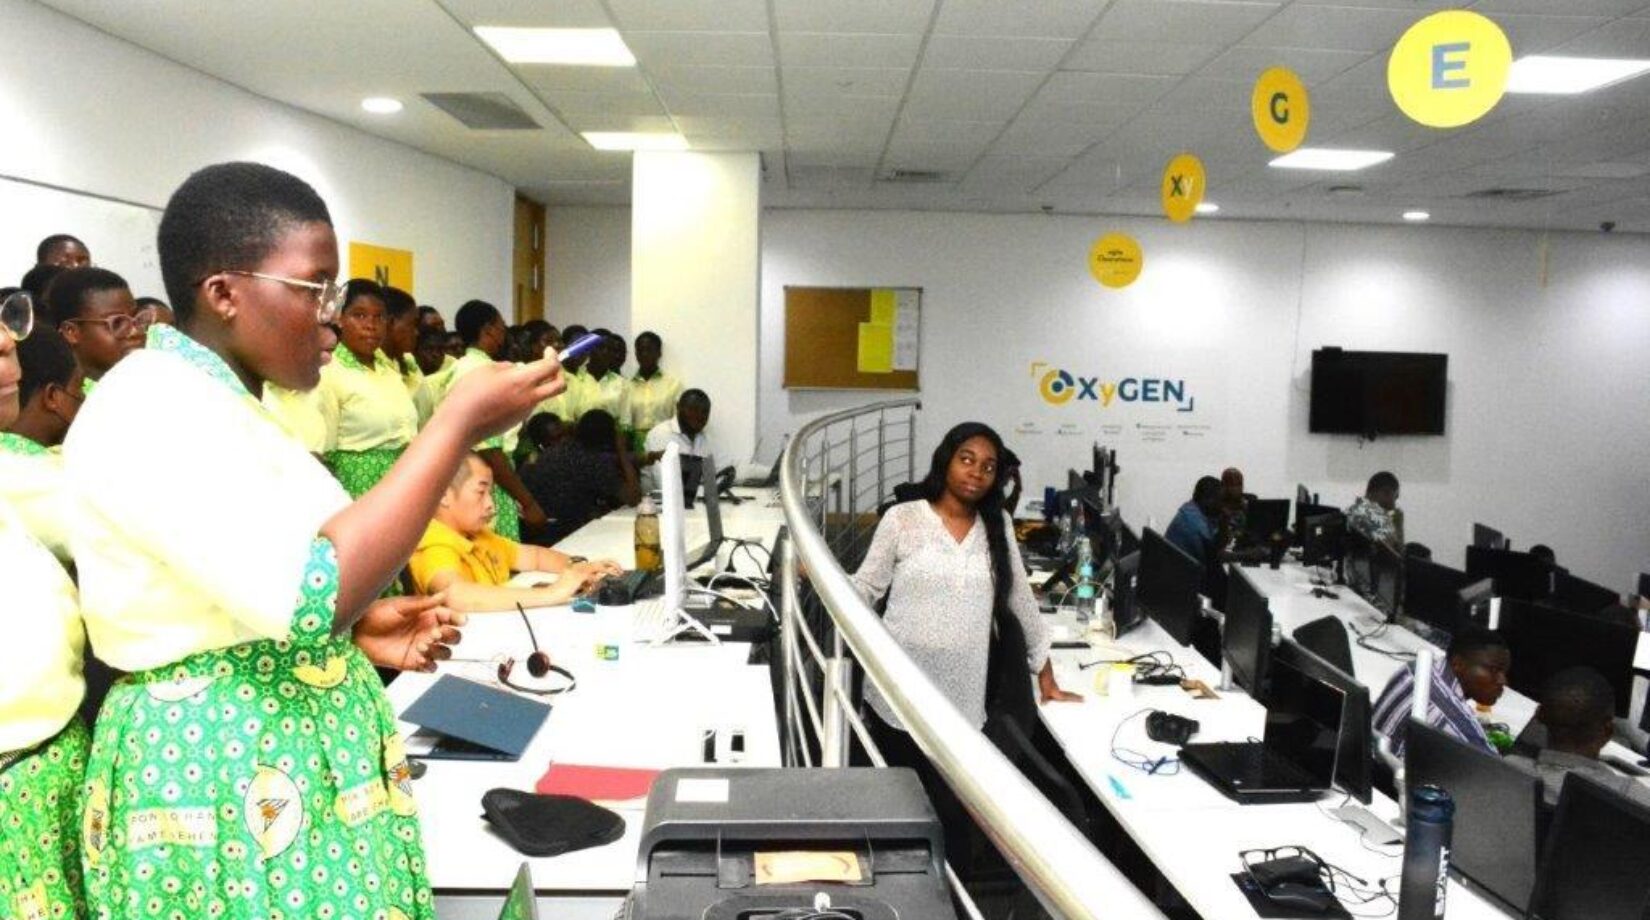 LET’S GIVE WOMEN AND GIRLS EQUAL OPPORTUNITIES TO PARTICIPATE IN THE DIGITAL ECONOMY, MTN’S ADWOA WIAFE SAYS